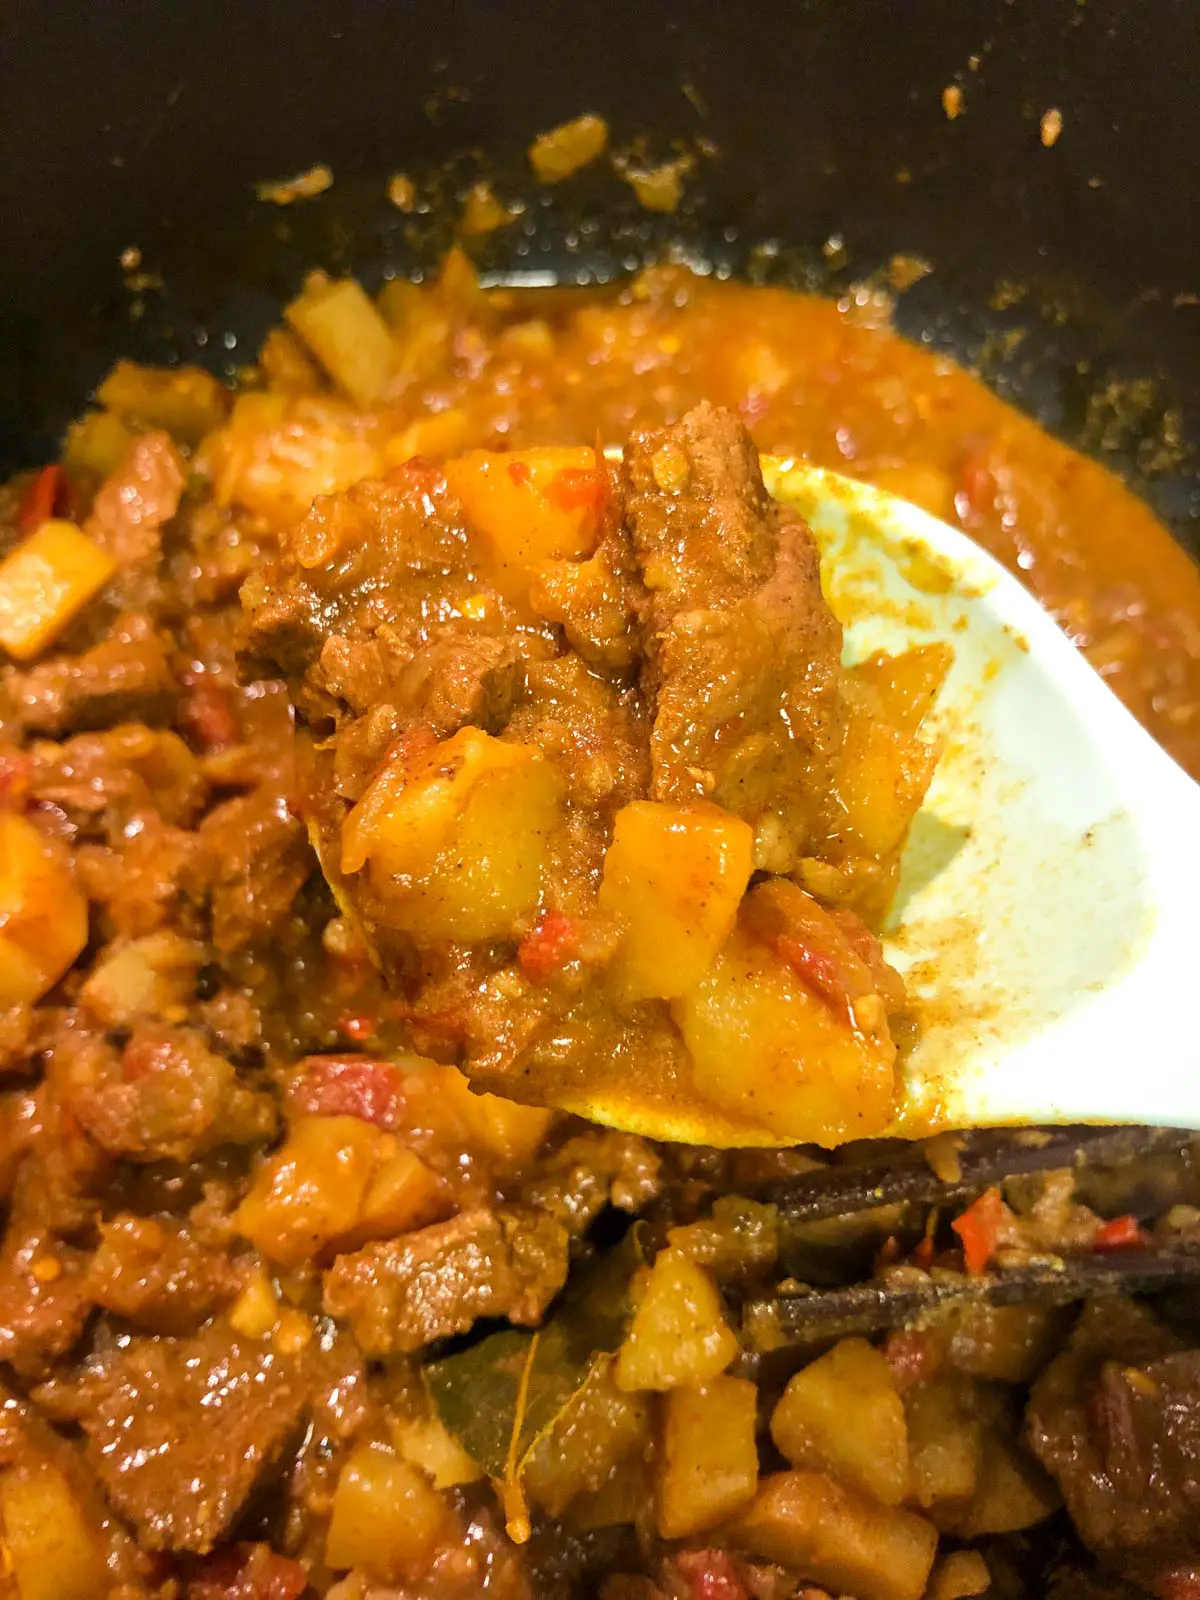 Lamb curry with cut up potatoes, mince chilies, a cinnamon stick and bay leaf, with a spoon containing some of the lamb curry in the foreground.